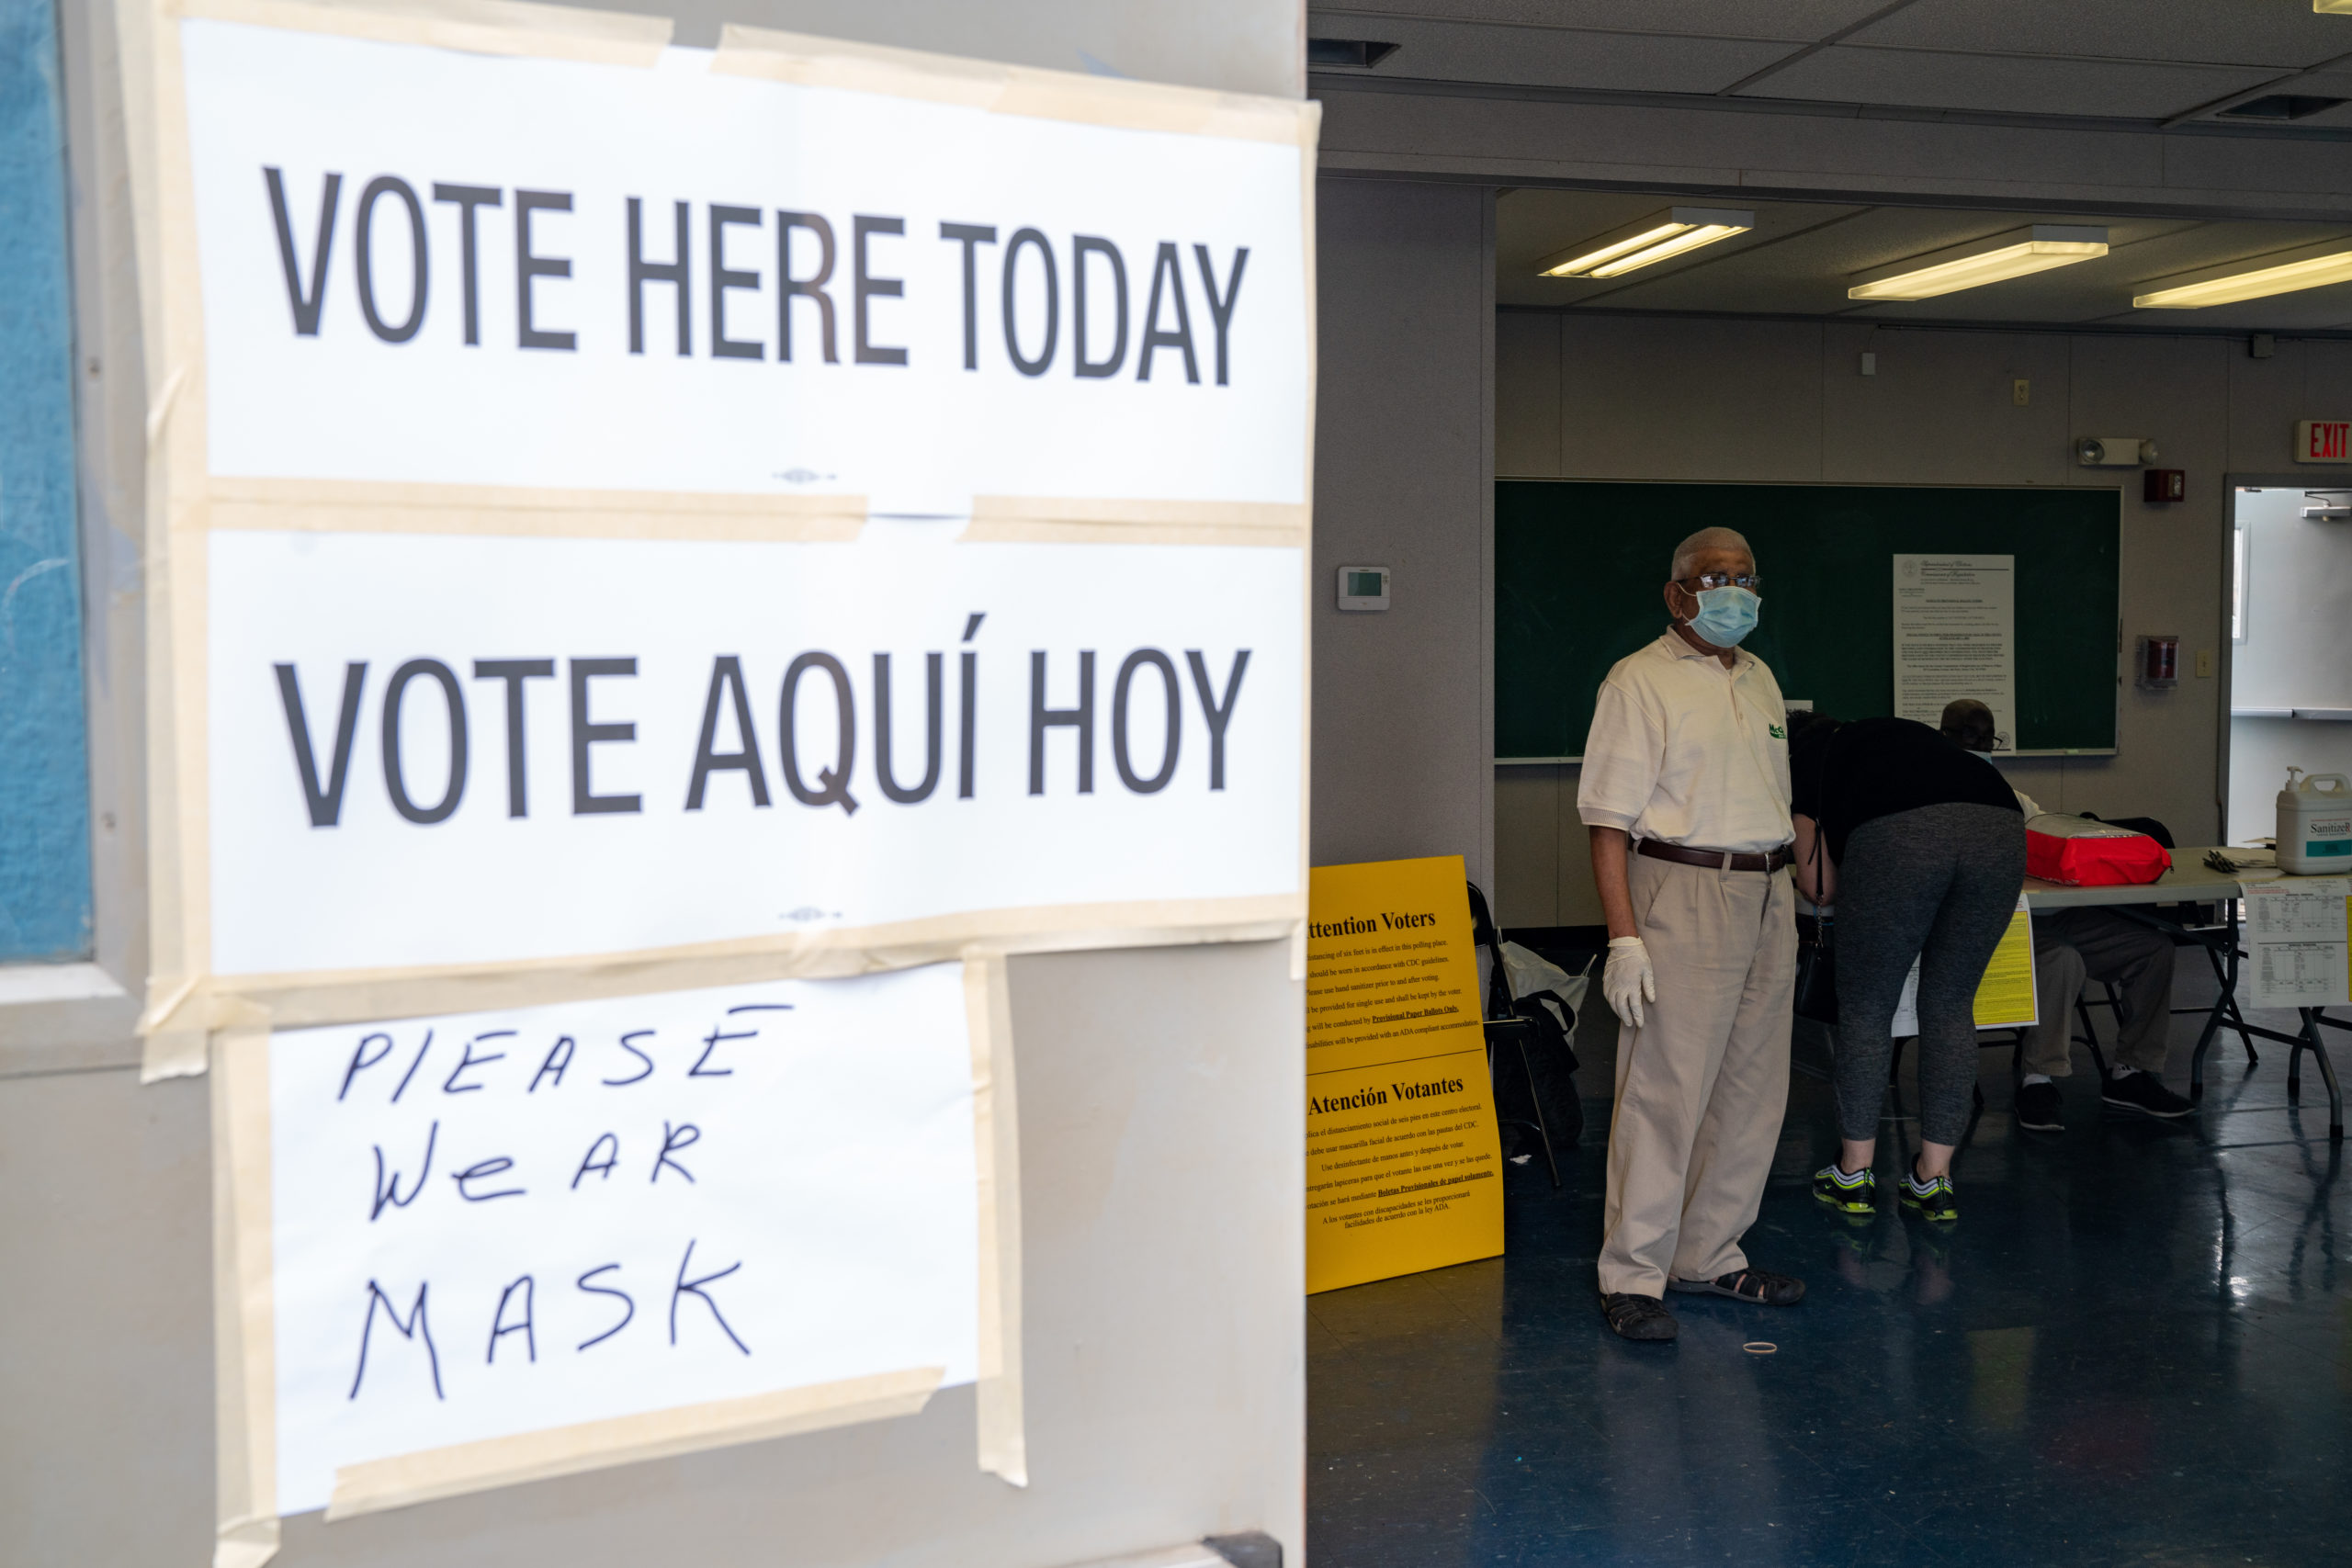 JERSEY CITY, NJ - JULY 07: A poll worker at Liberty High School on July 7, 2020 in Jersey City, New Jersey. New Jersey residents will choose their candidates for president, Senate and House but because of the pandemic most are casting their votes by mail-in ballots. (Photo by David Dee Delgado/Getty Images)